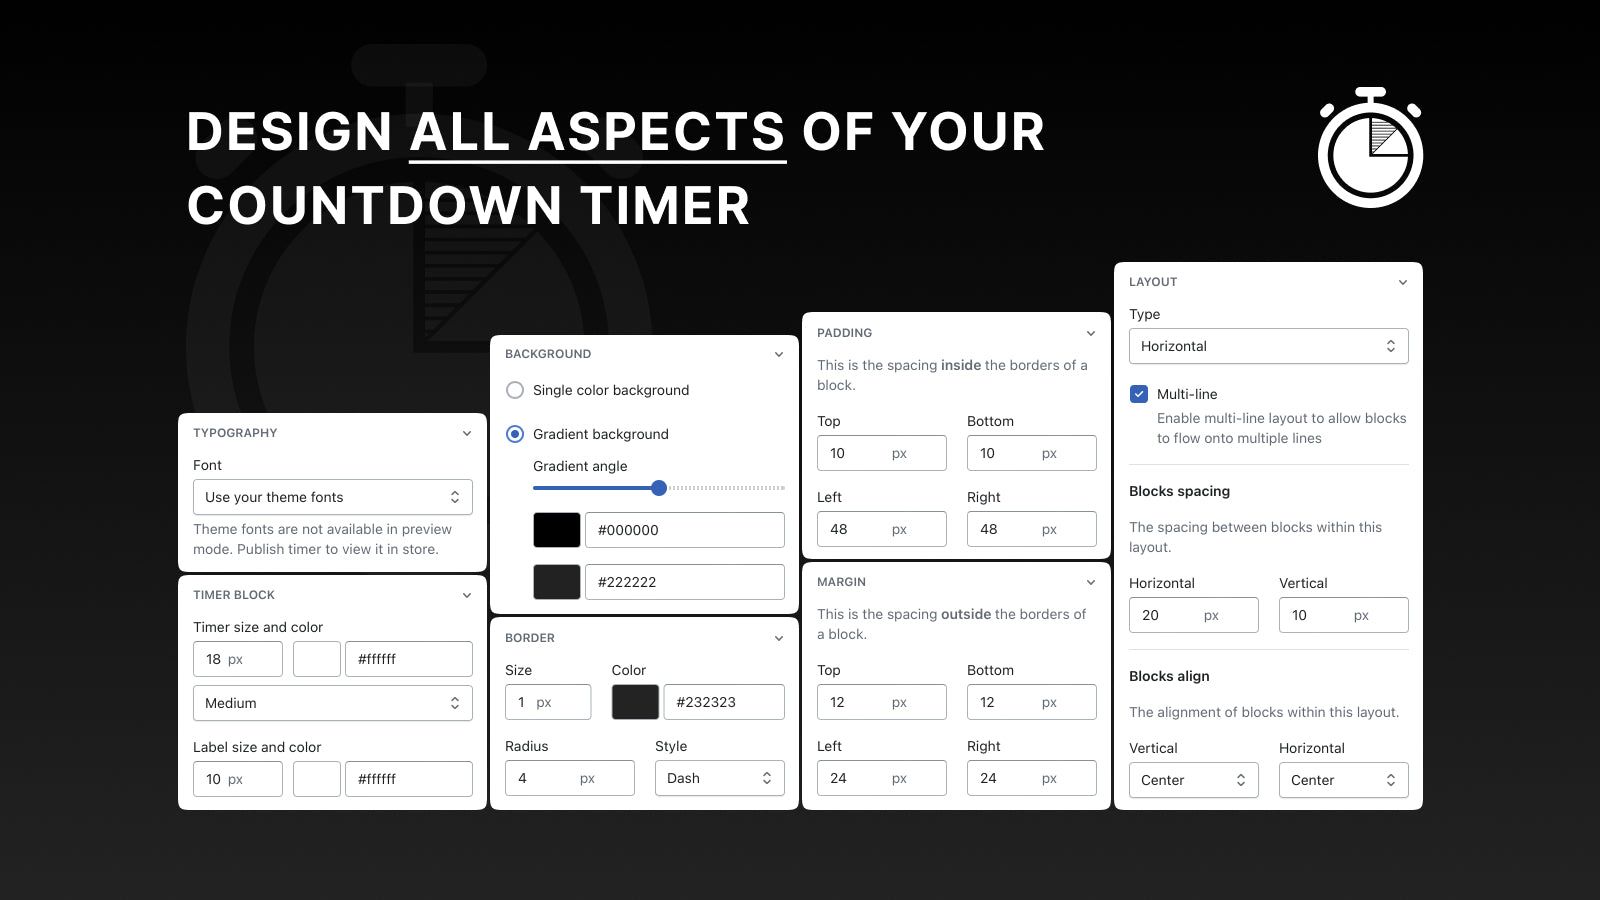 Design all aspects of your countdown timer